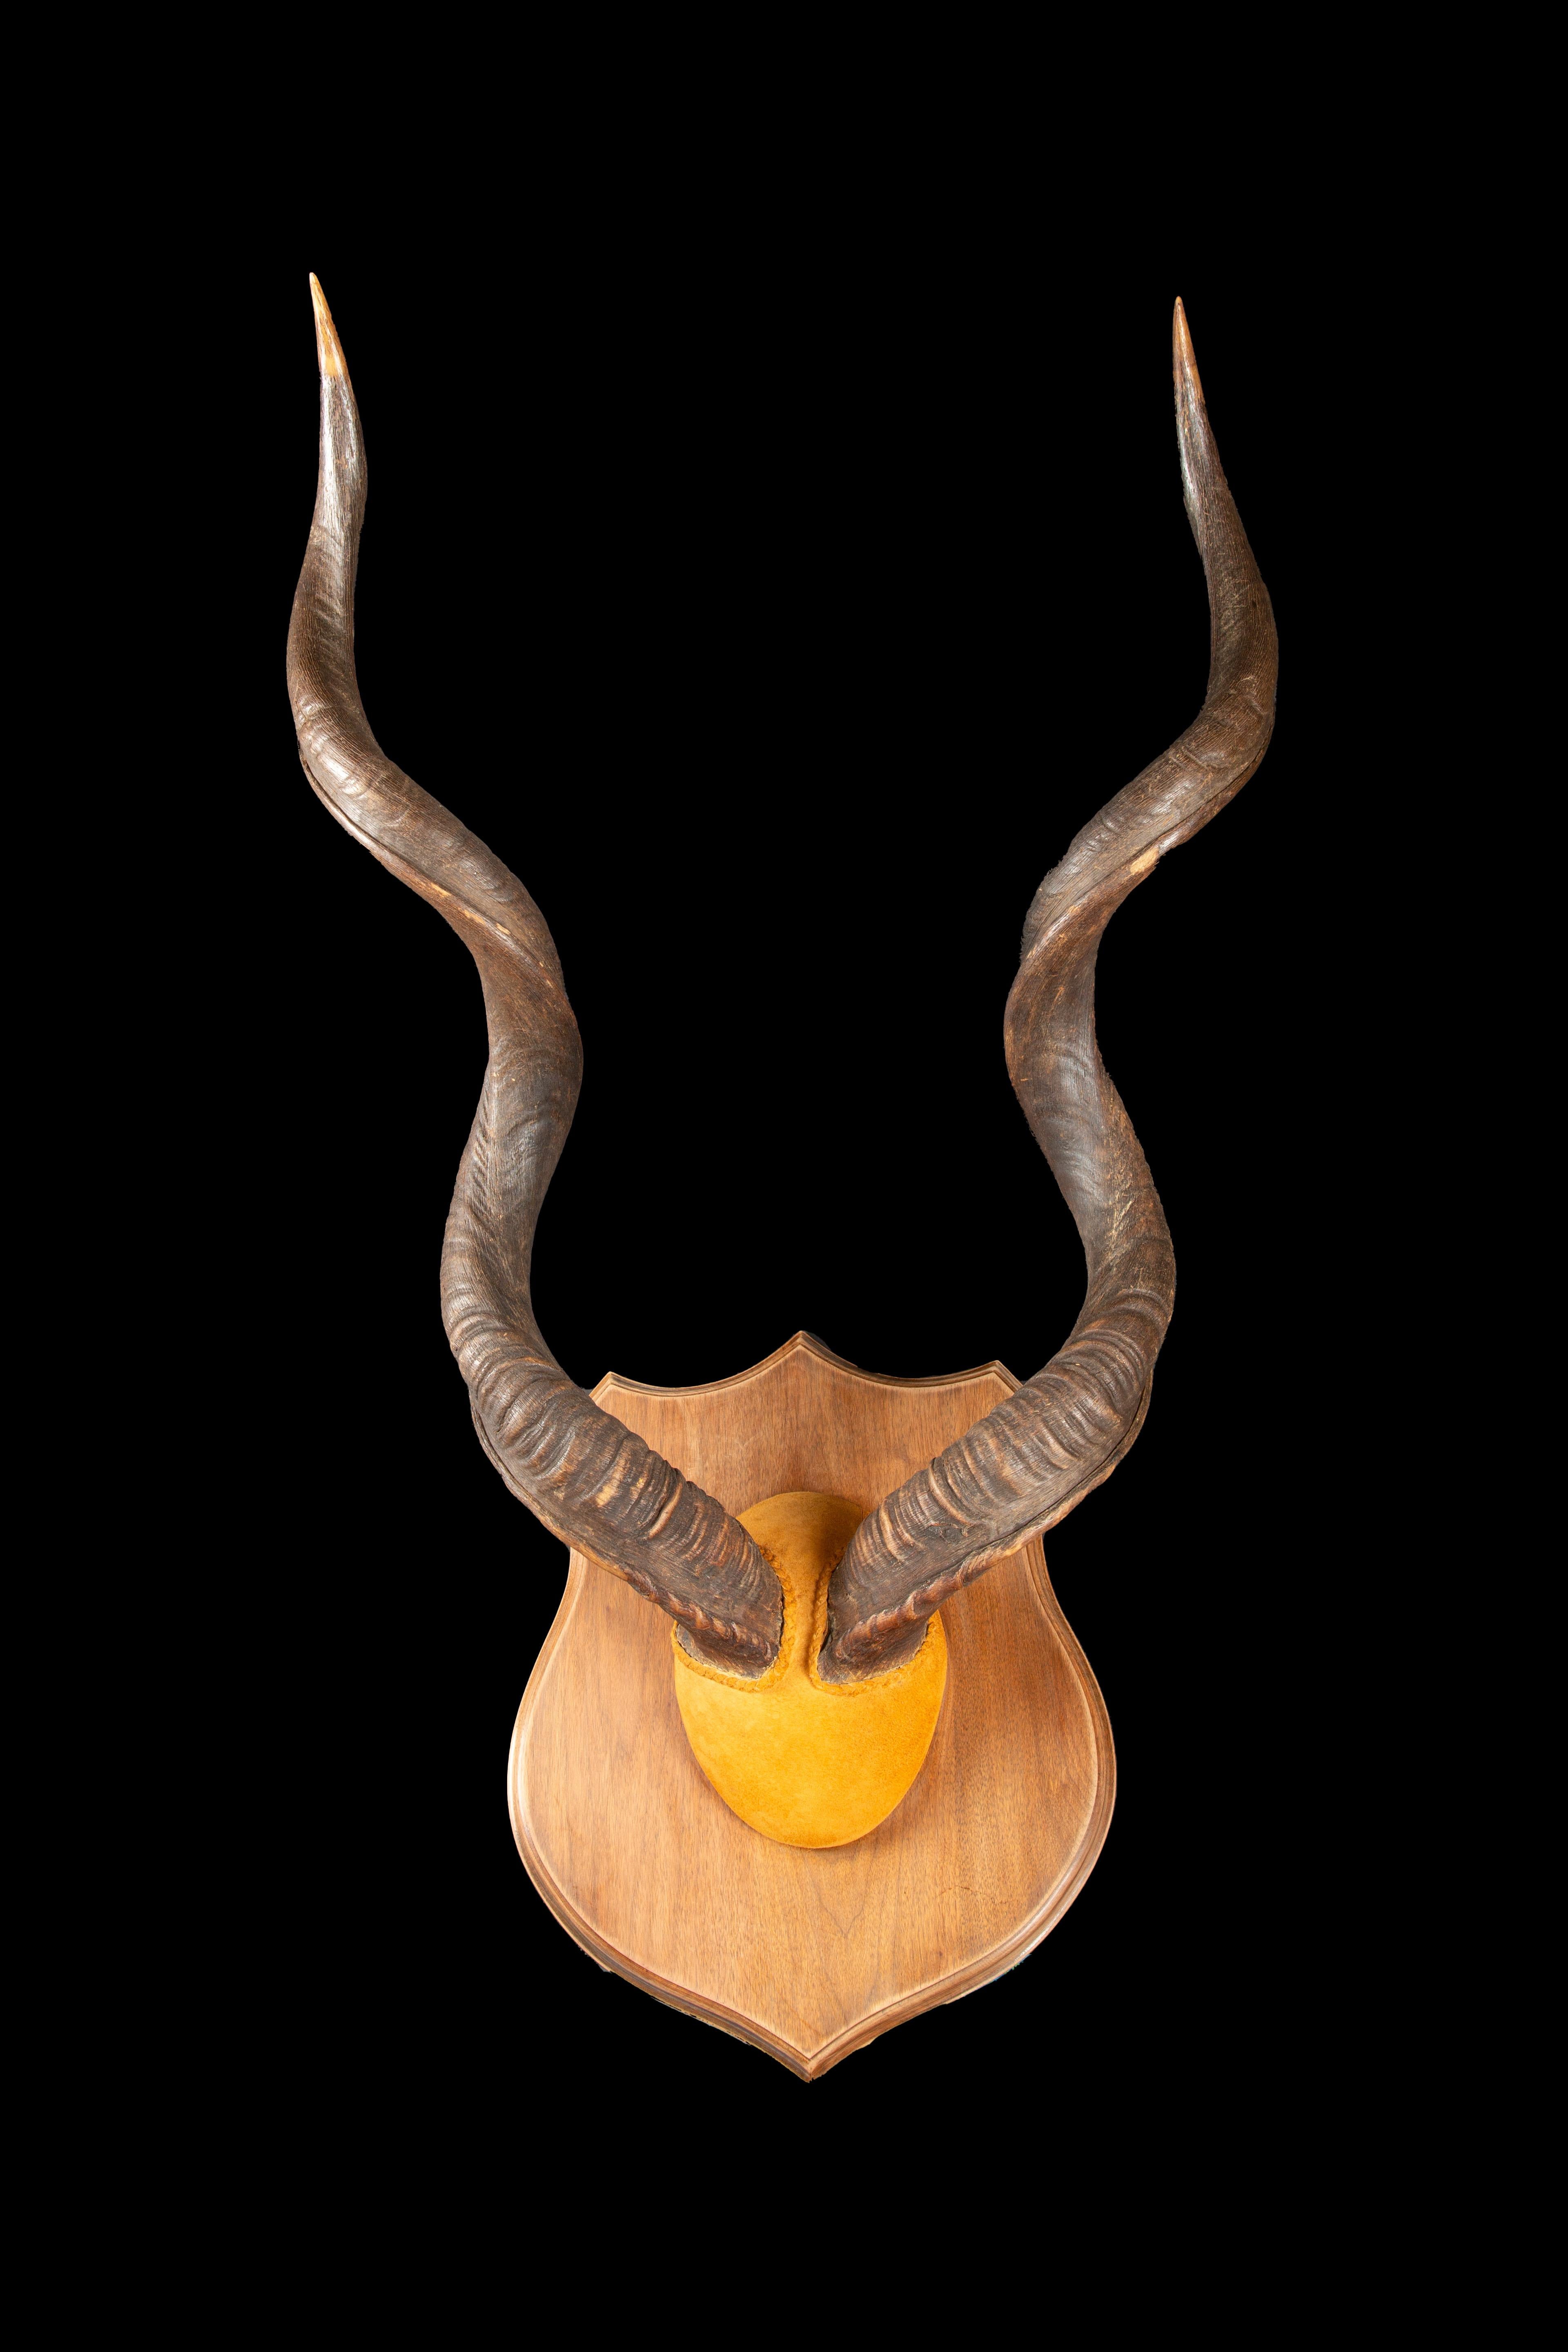 Very large pair of mounted Kudu horns. The greater kudu, or Tragelaphus strepsiceros, stands as a majestic woodland antelope, widespread across the varied landscapes of eastern and southern Africa. This species, characterized by its striking size